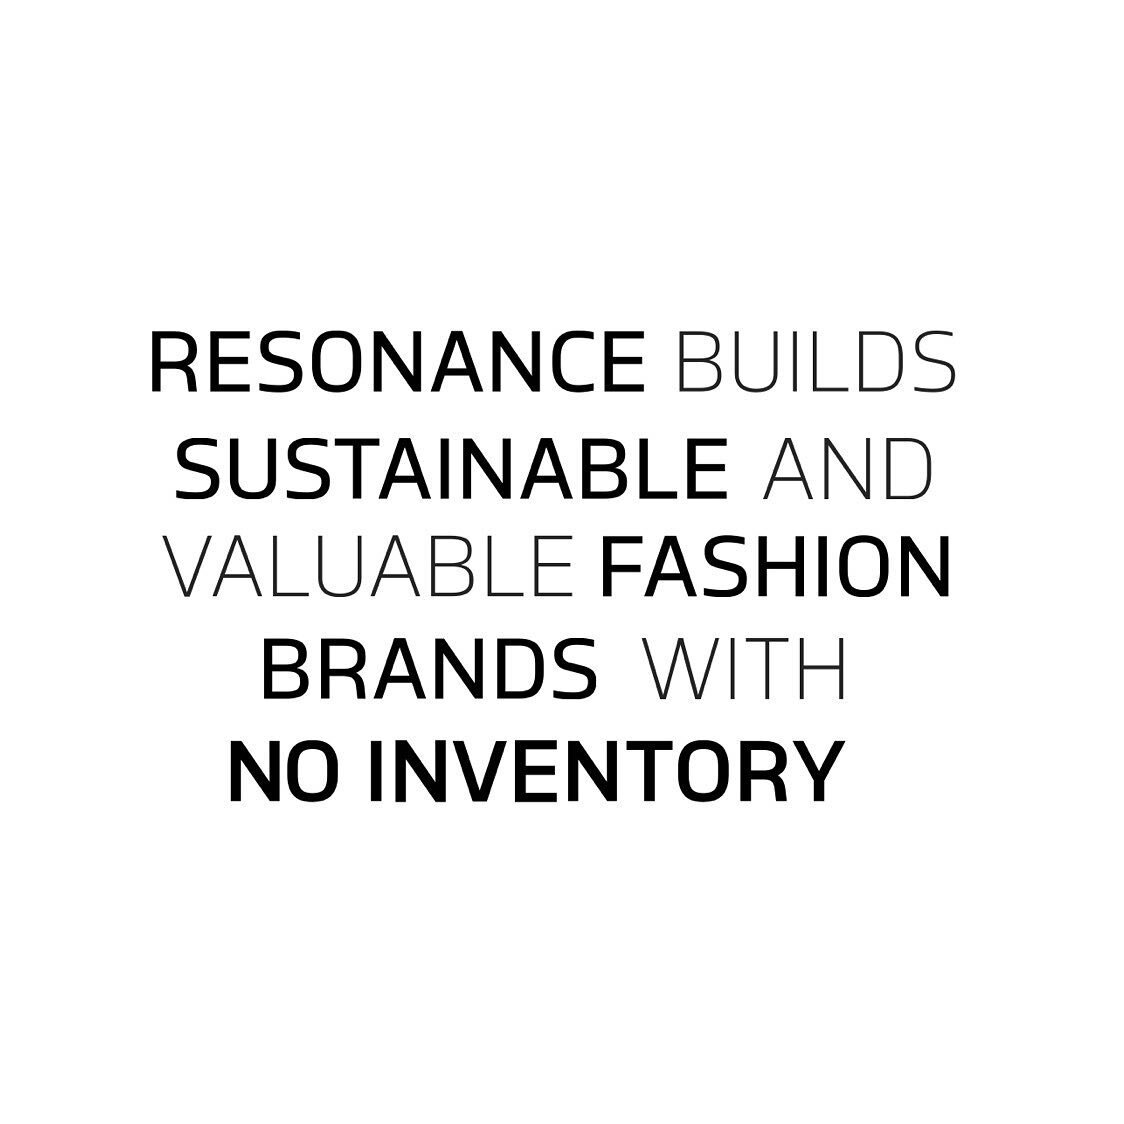 I am so proud to be a part of @resonancebrands 💥 we are changing the Fashion Industry one garment at a time with a focus on enabling brands to create more sustainable, economic, environmental, and social value.